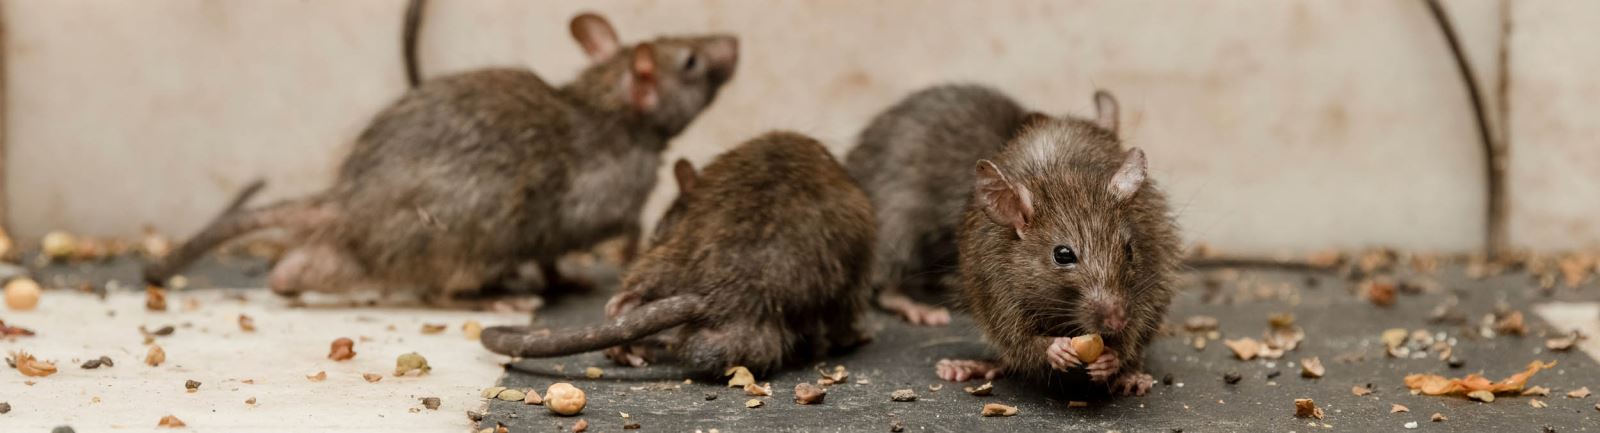 Our pest control porthcawl and Swansea offers rodent control Cardiff and preventative pest control services. 